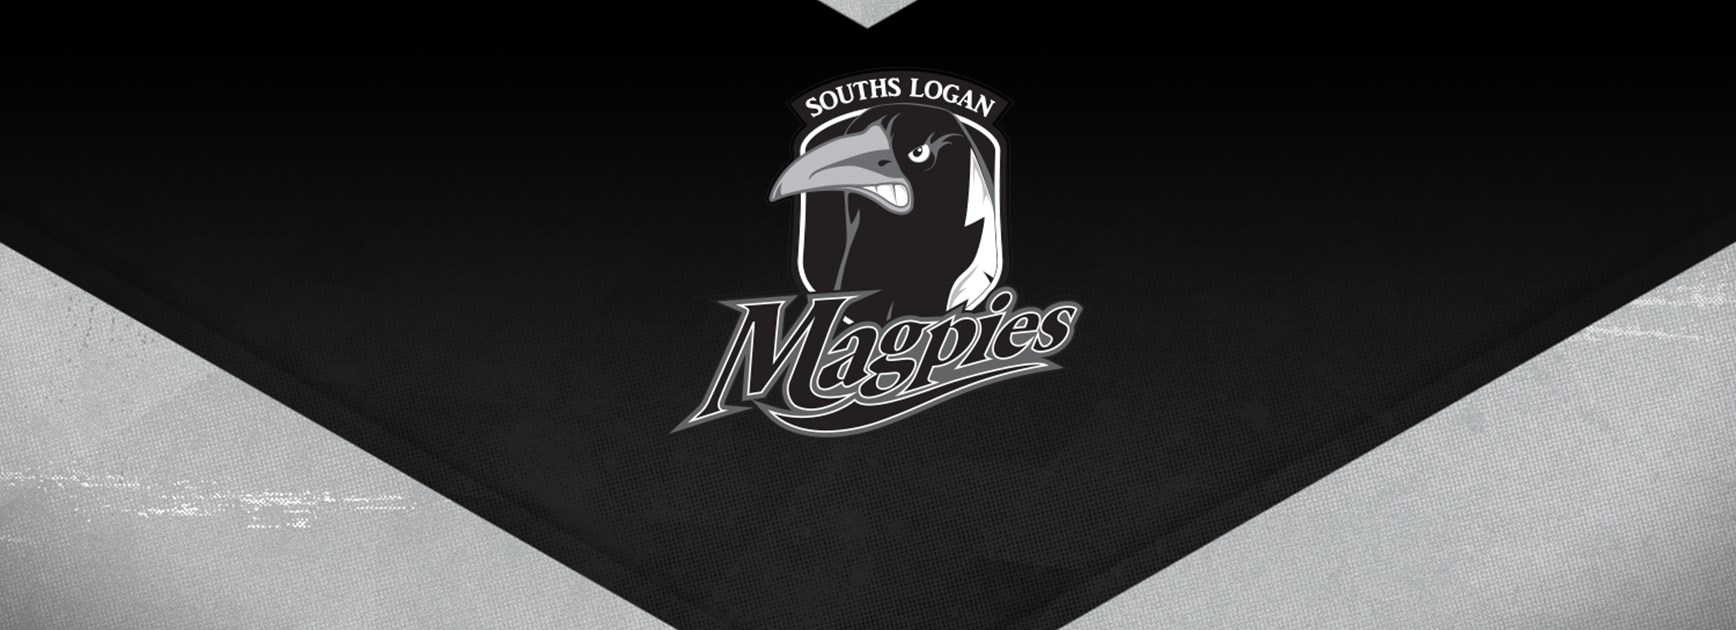 Flying first half from Magpies secures win over Gulls